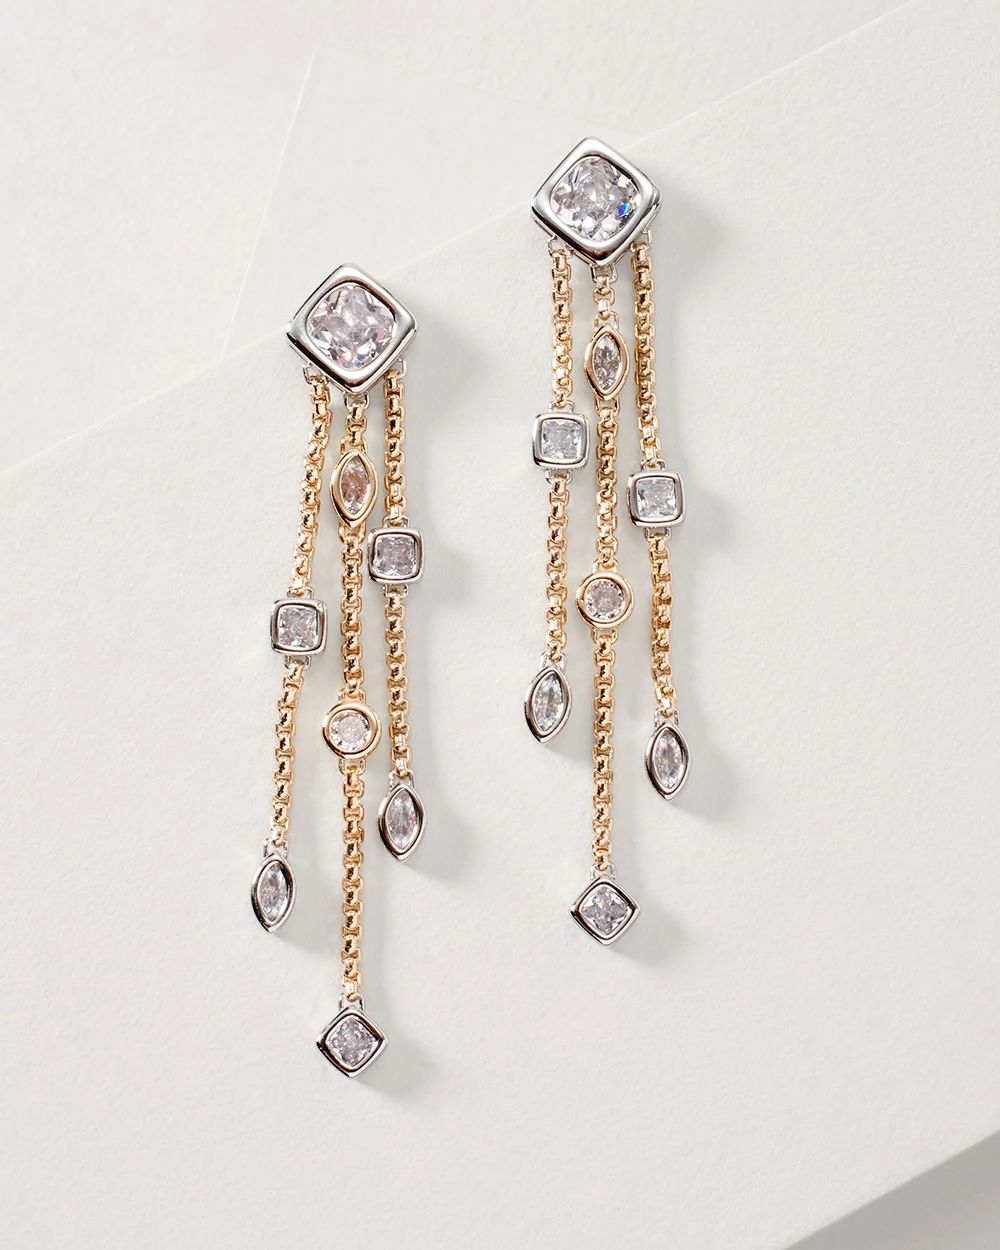 Silvertone & Goldtone Cubic Zirconia Earrings click to view larger image.